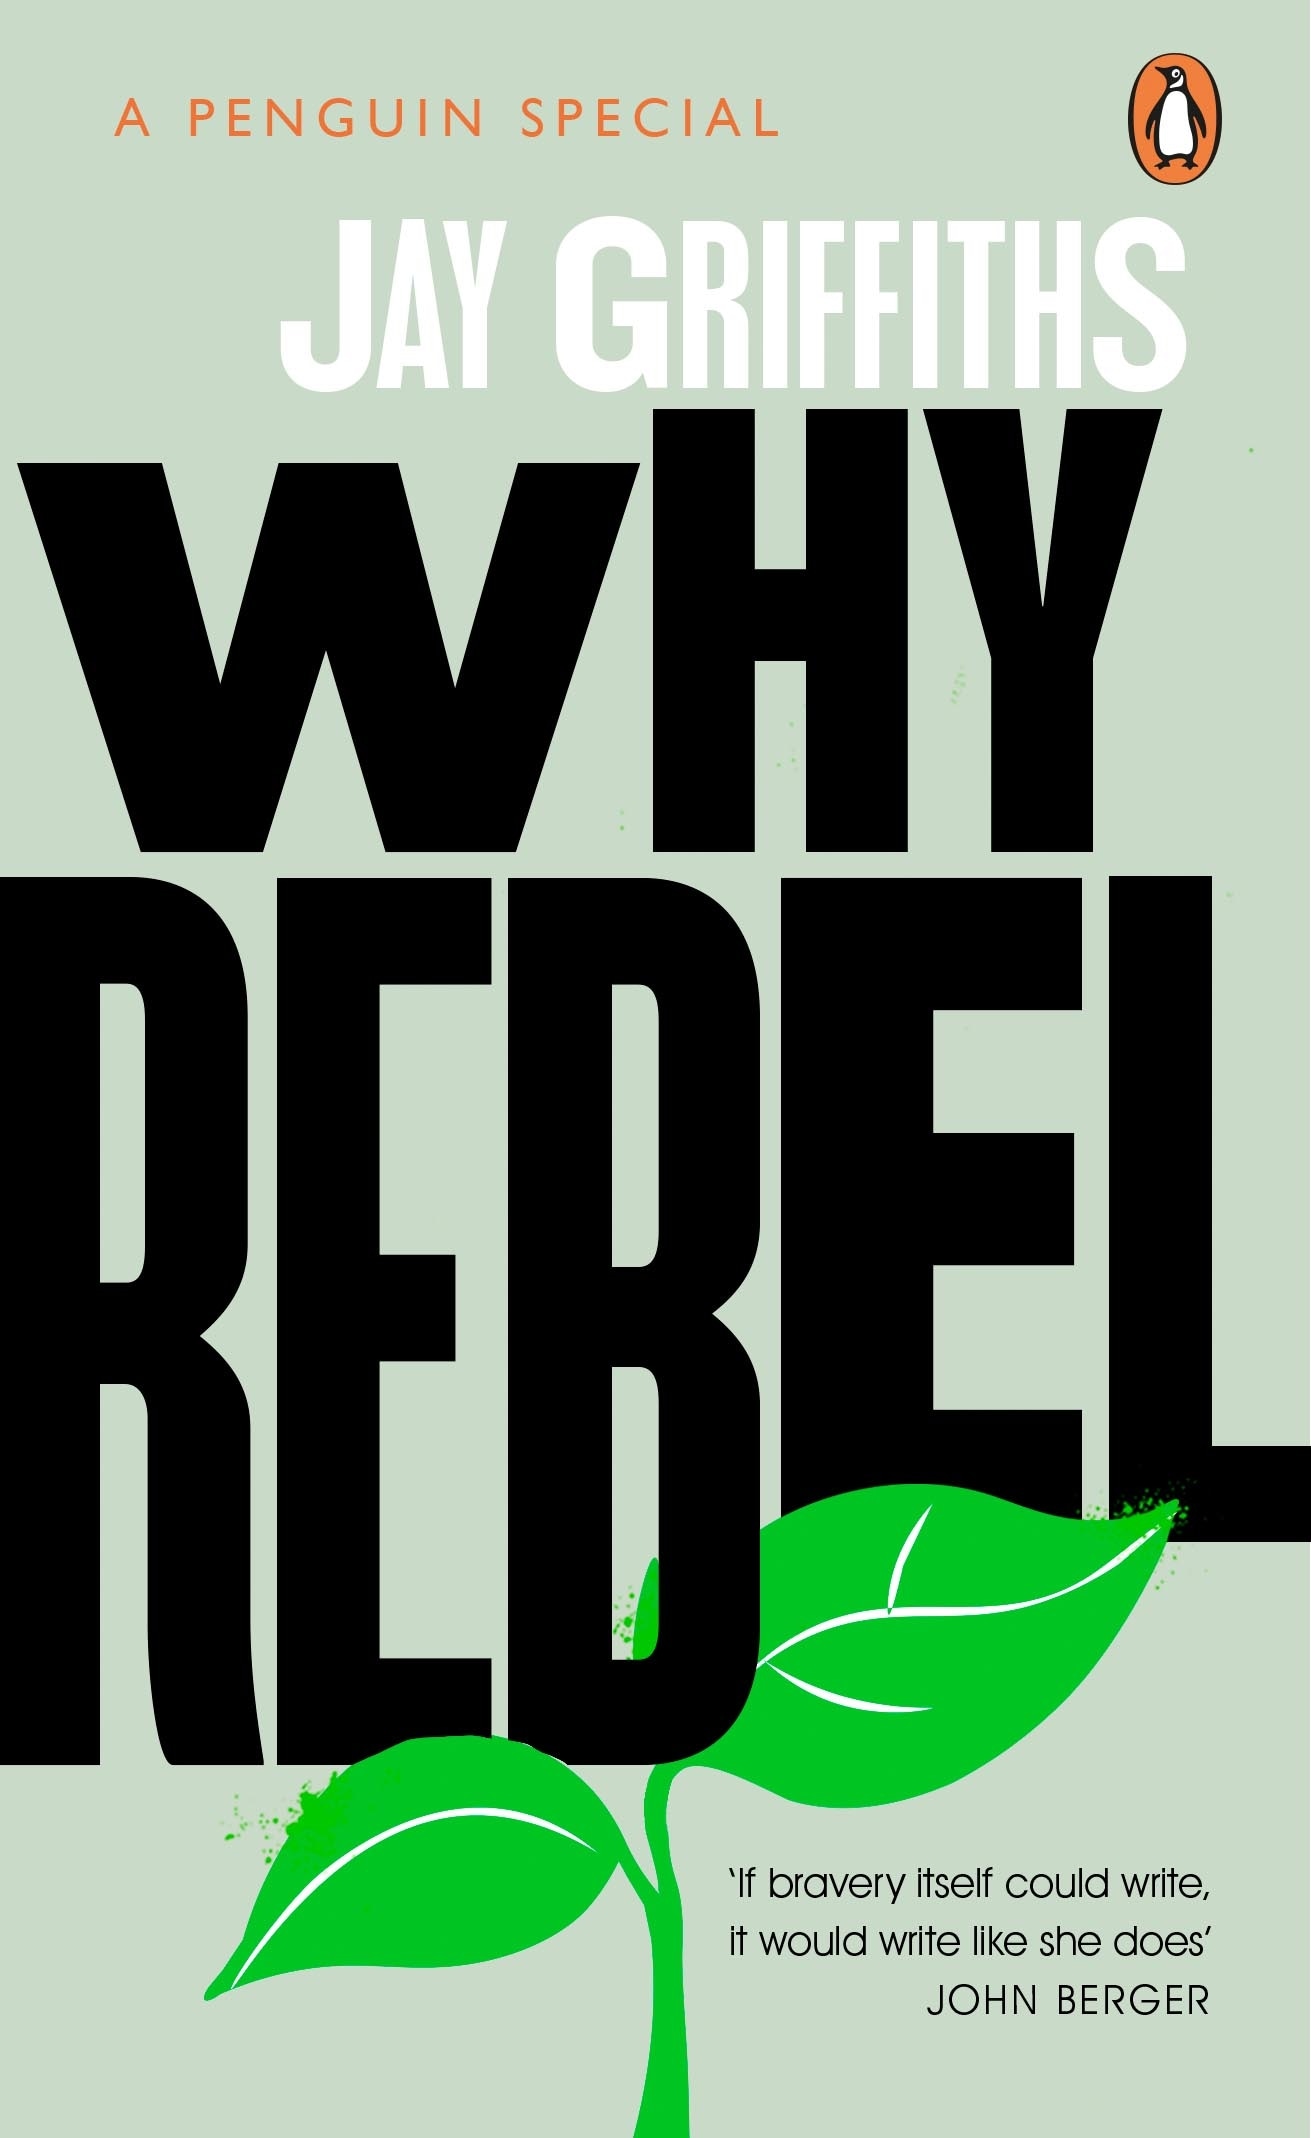 Book “Why Rebel” by Jay Griffiths — April 8, 2021